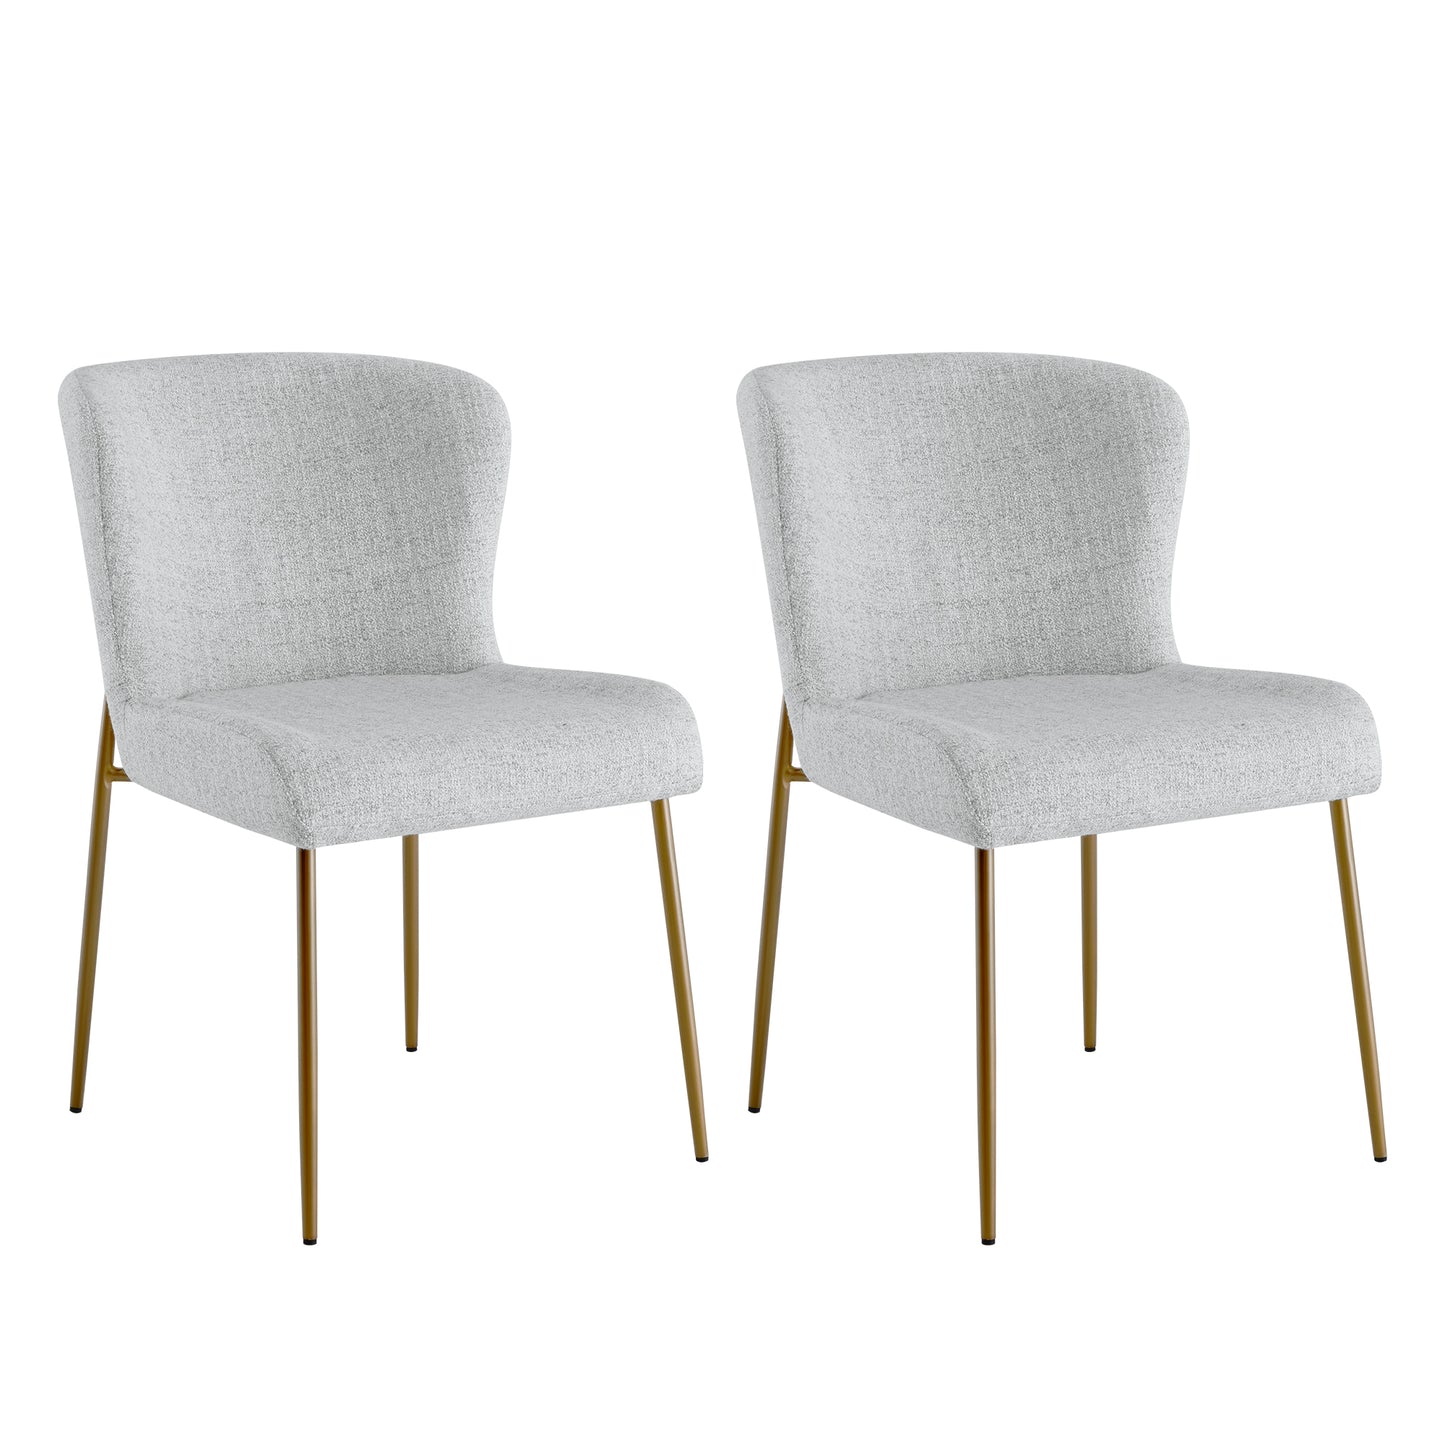 dining chair set of 2